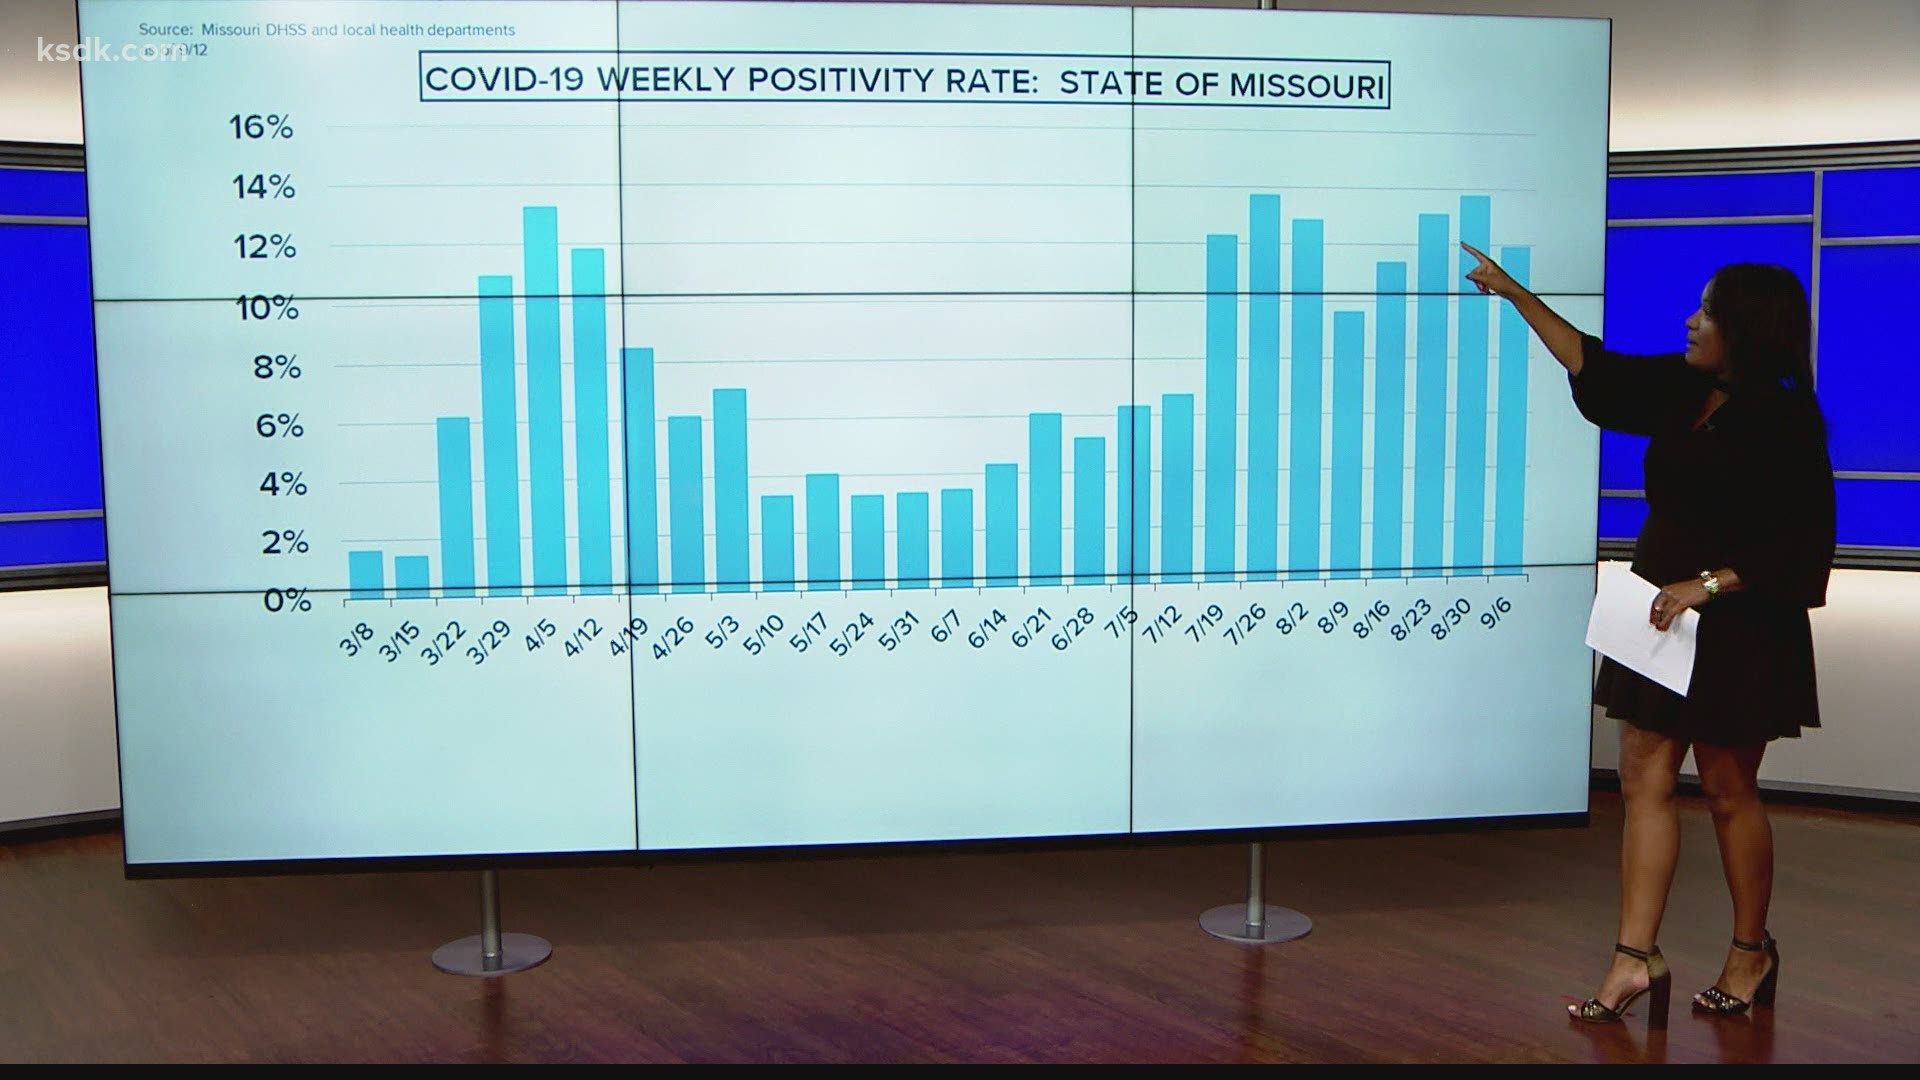 Data for the State of Missouri, shows when testing is up, the postivity rate dips. When testing goes down, the percentage of positive tests ticks back up